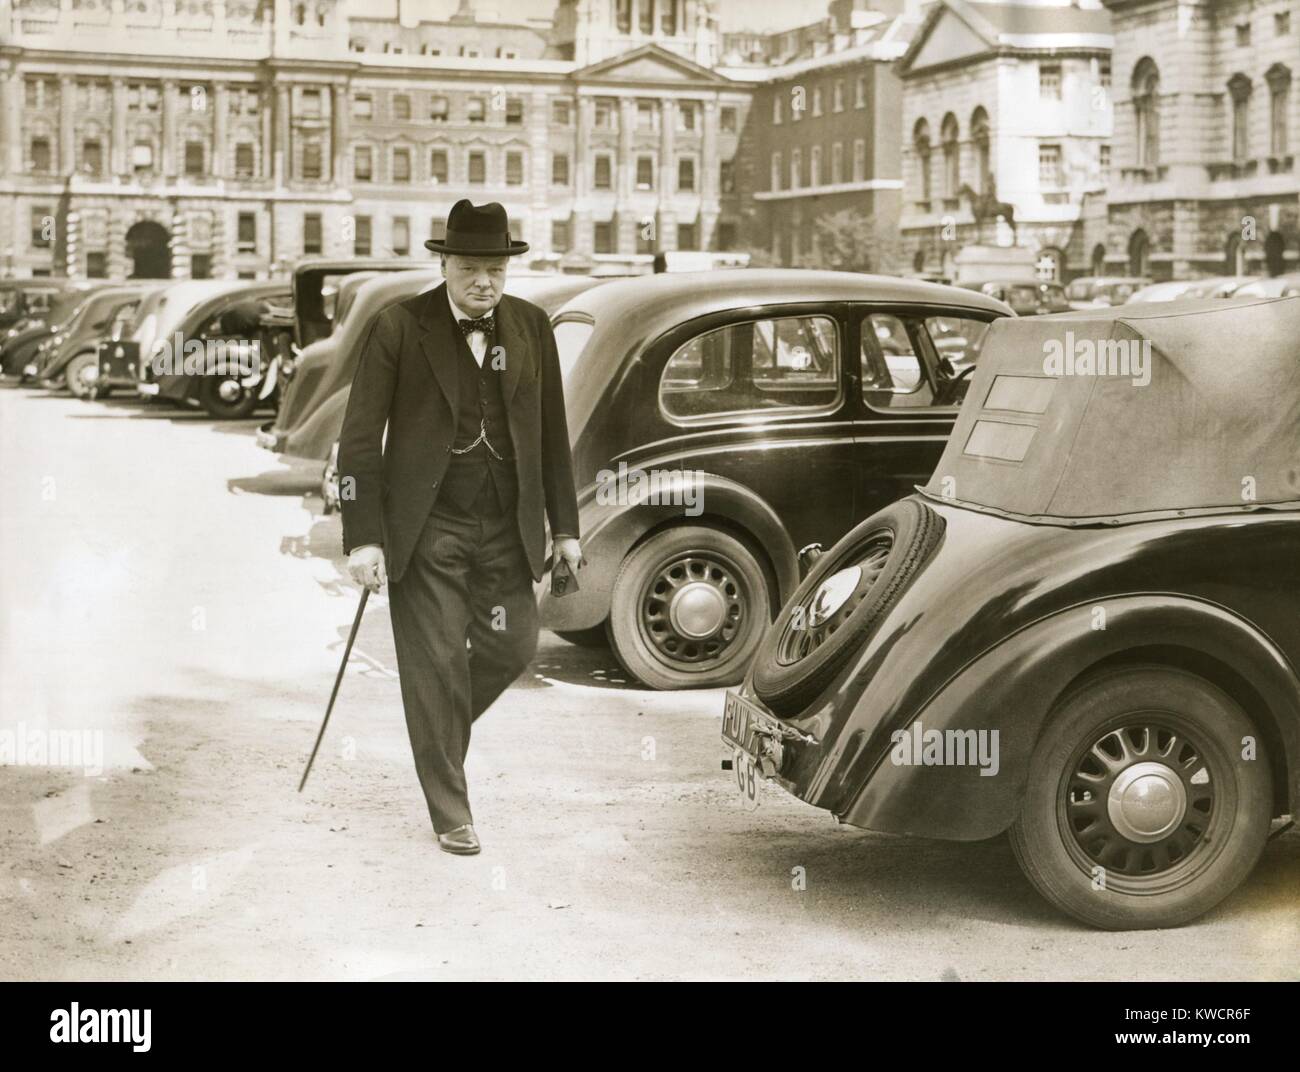 Mr. Winston Churchill, First Lord of the Admiralty, walking to 10 Downing Street, Sept. 7, 1939. He was in Prime Minister Neville Chamberlain's War Cabinet, formed after the German invasion of Poland on Sept. 1 , 1939. - (BSLOC 2014 17 32) Stock Photo